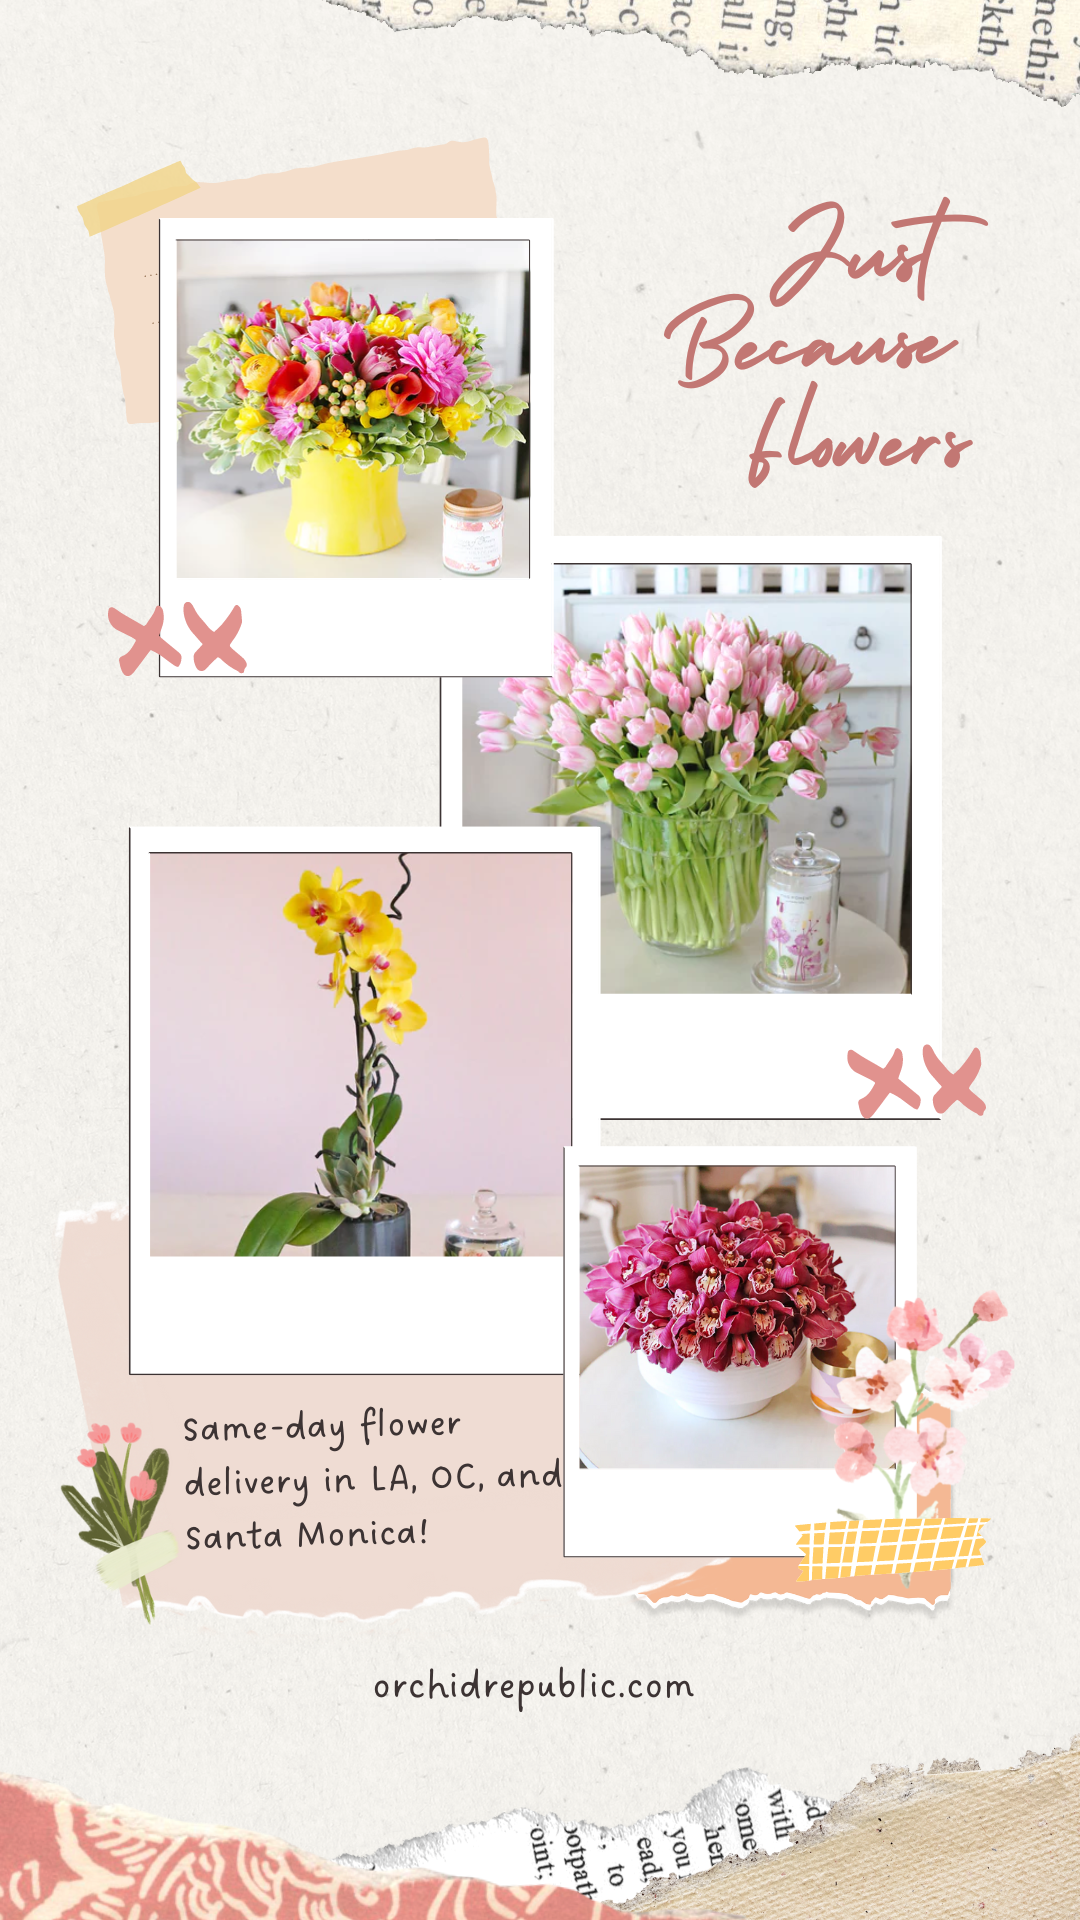 Why Sending Flowers Just Because Is the Sweetest - Orchid Republic